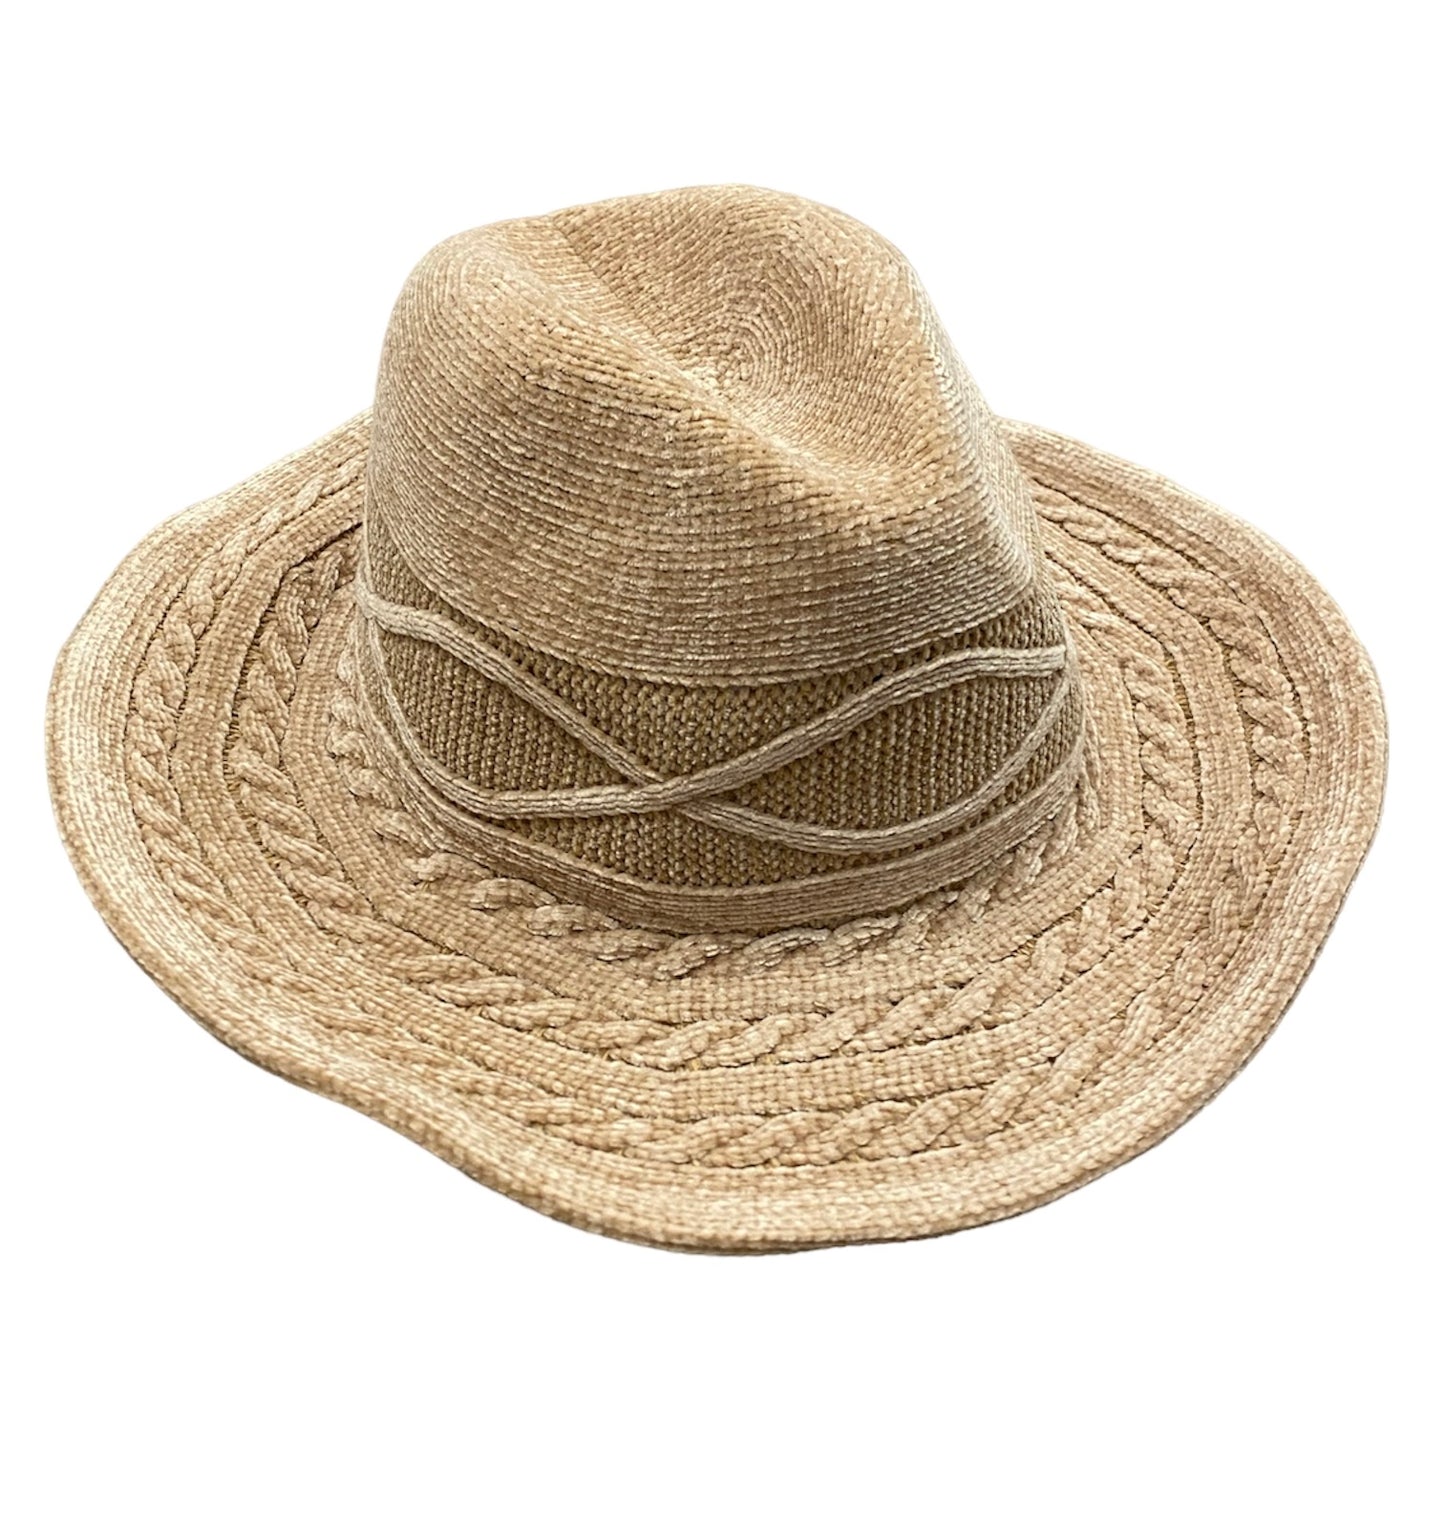 Camel Colored Hat